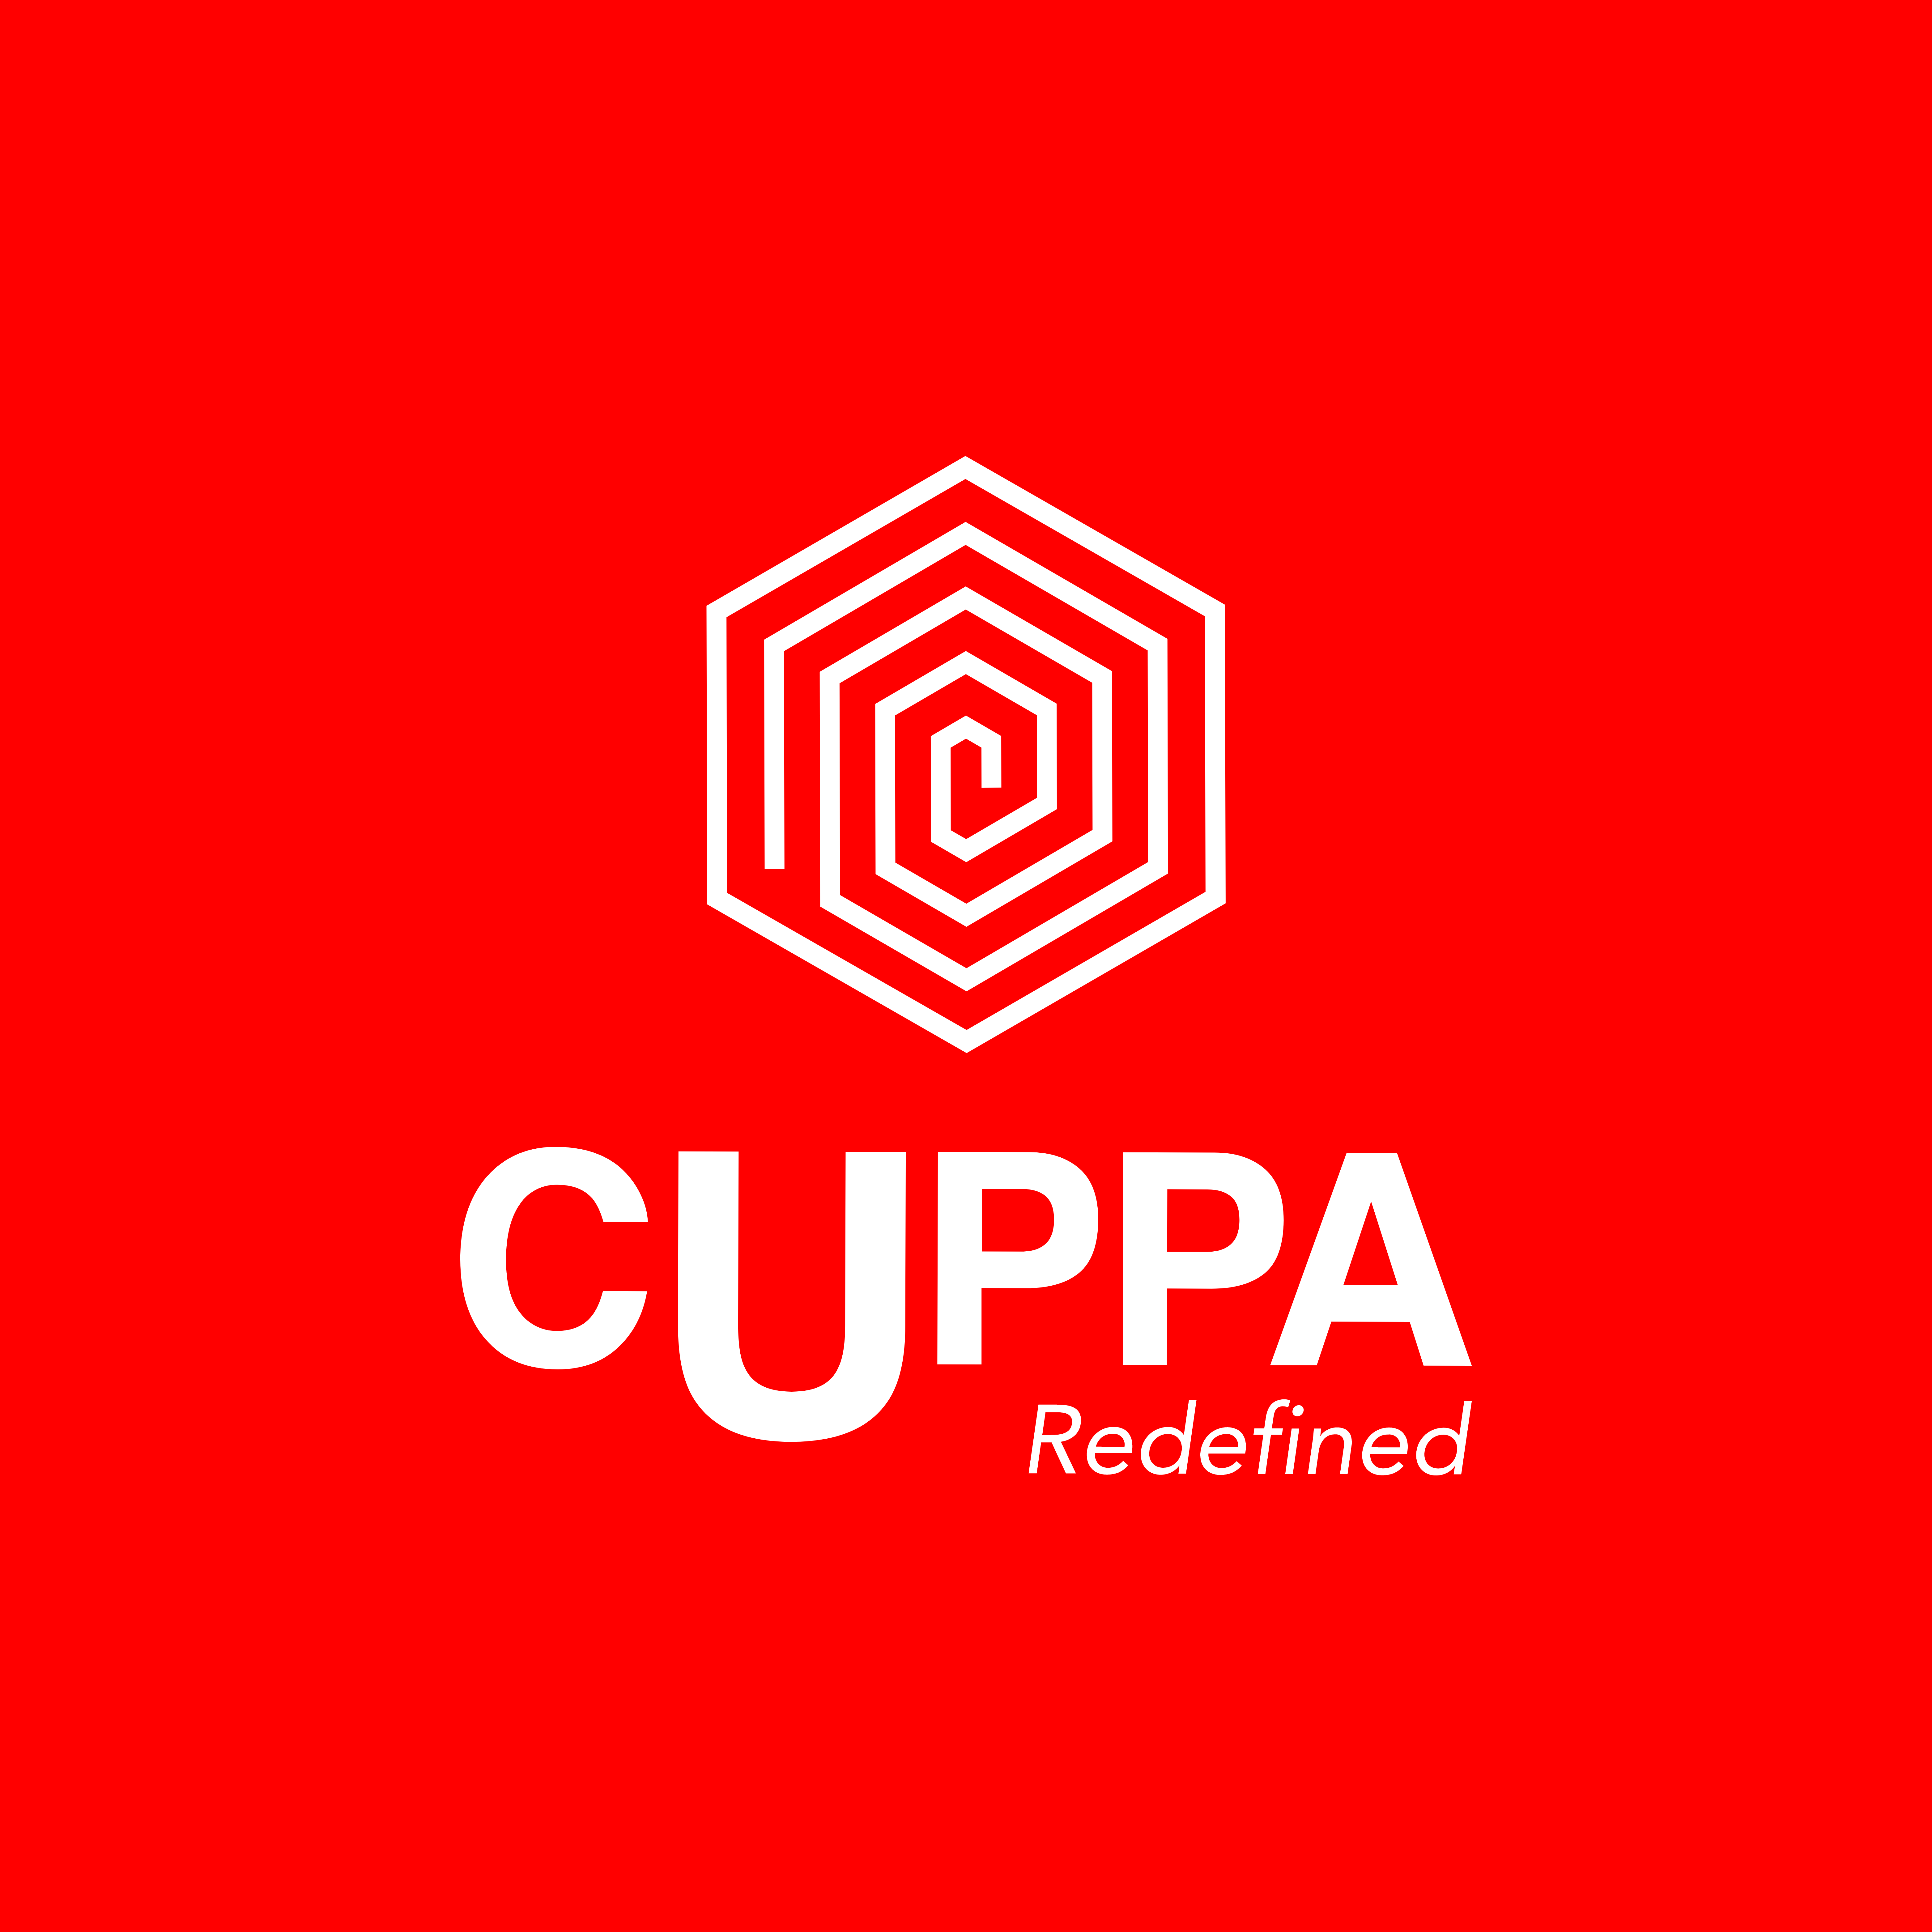 Cuppa Redefined logo